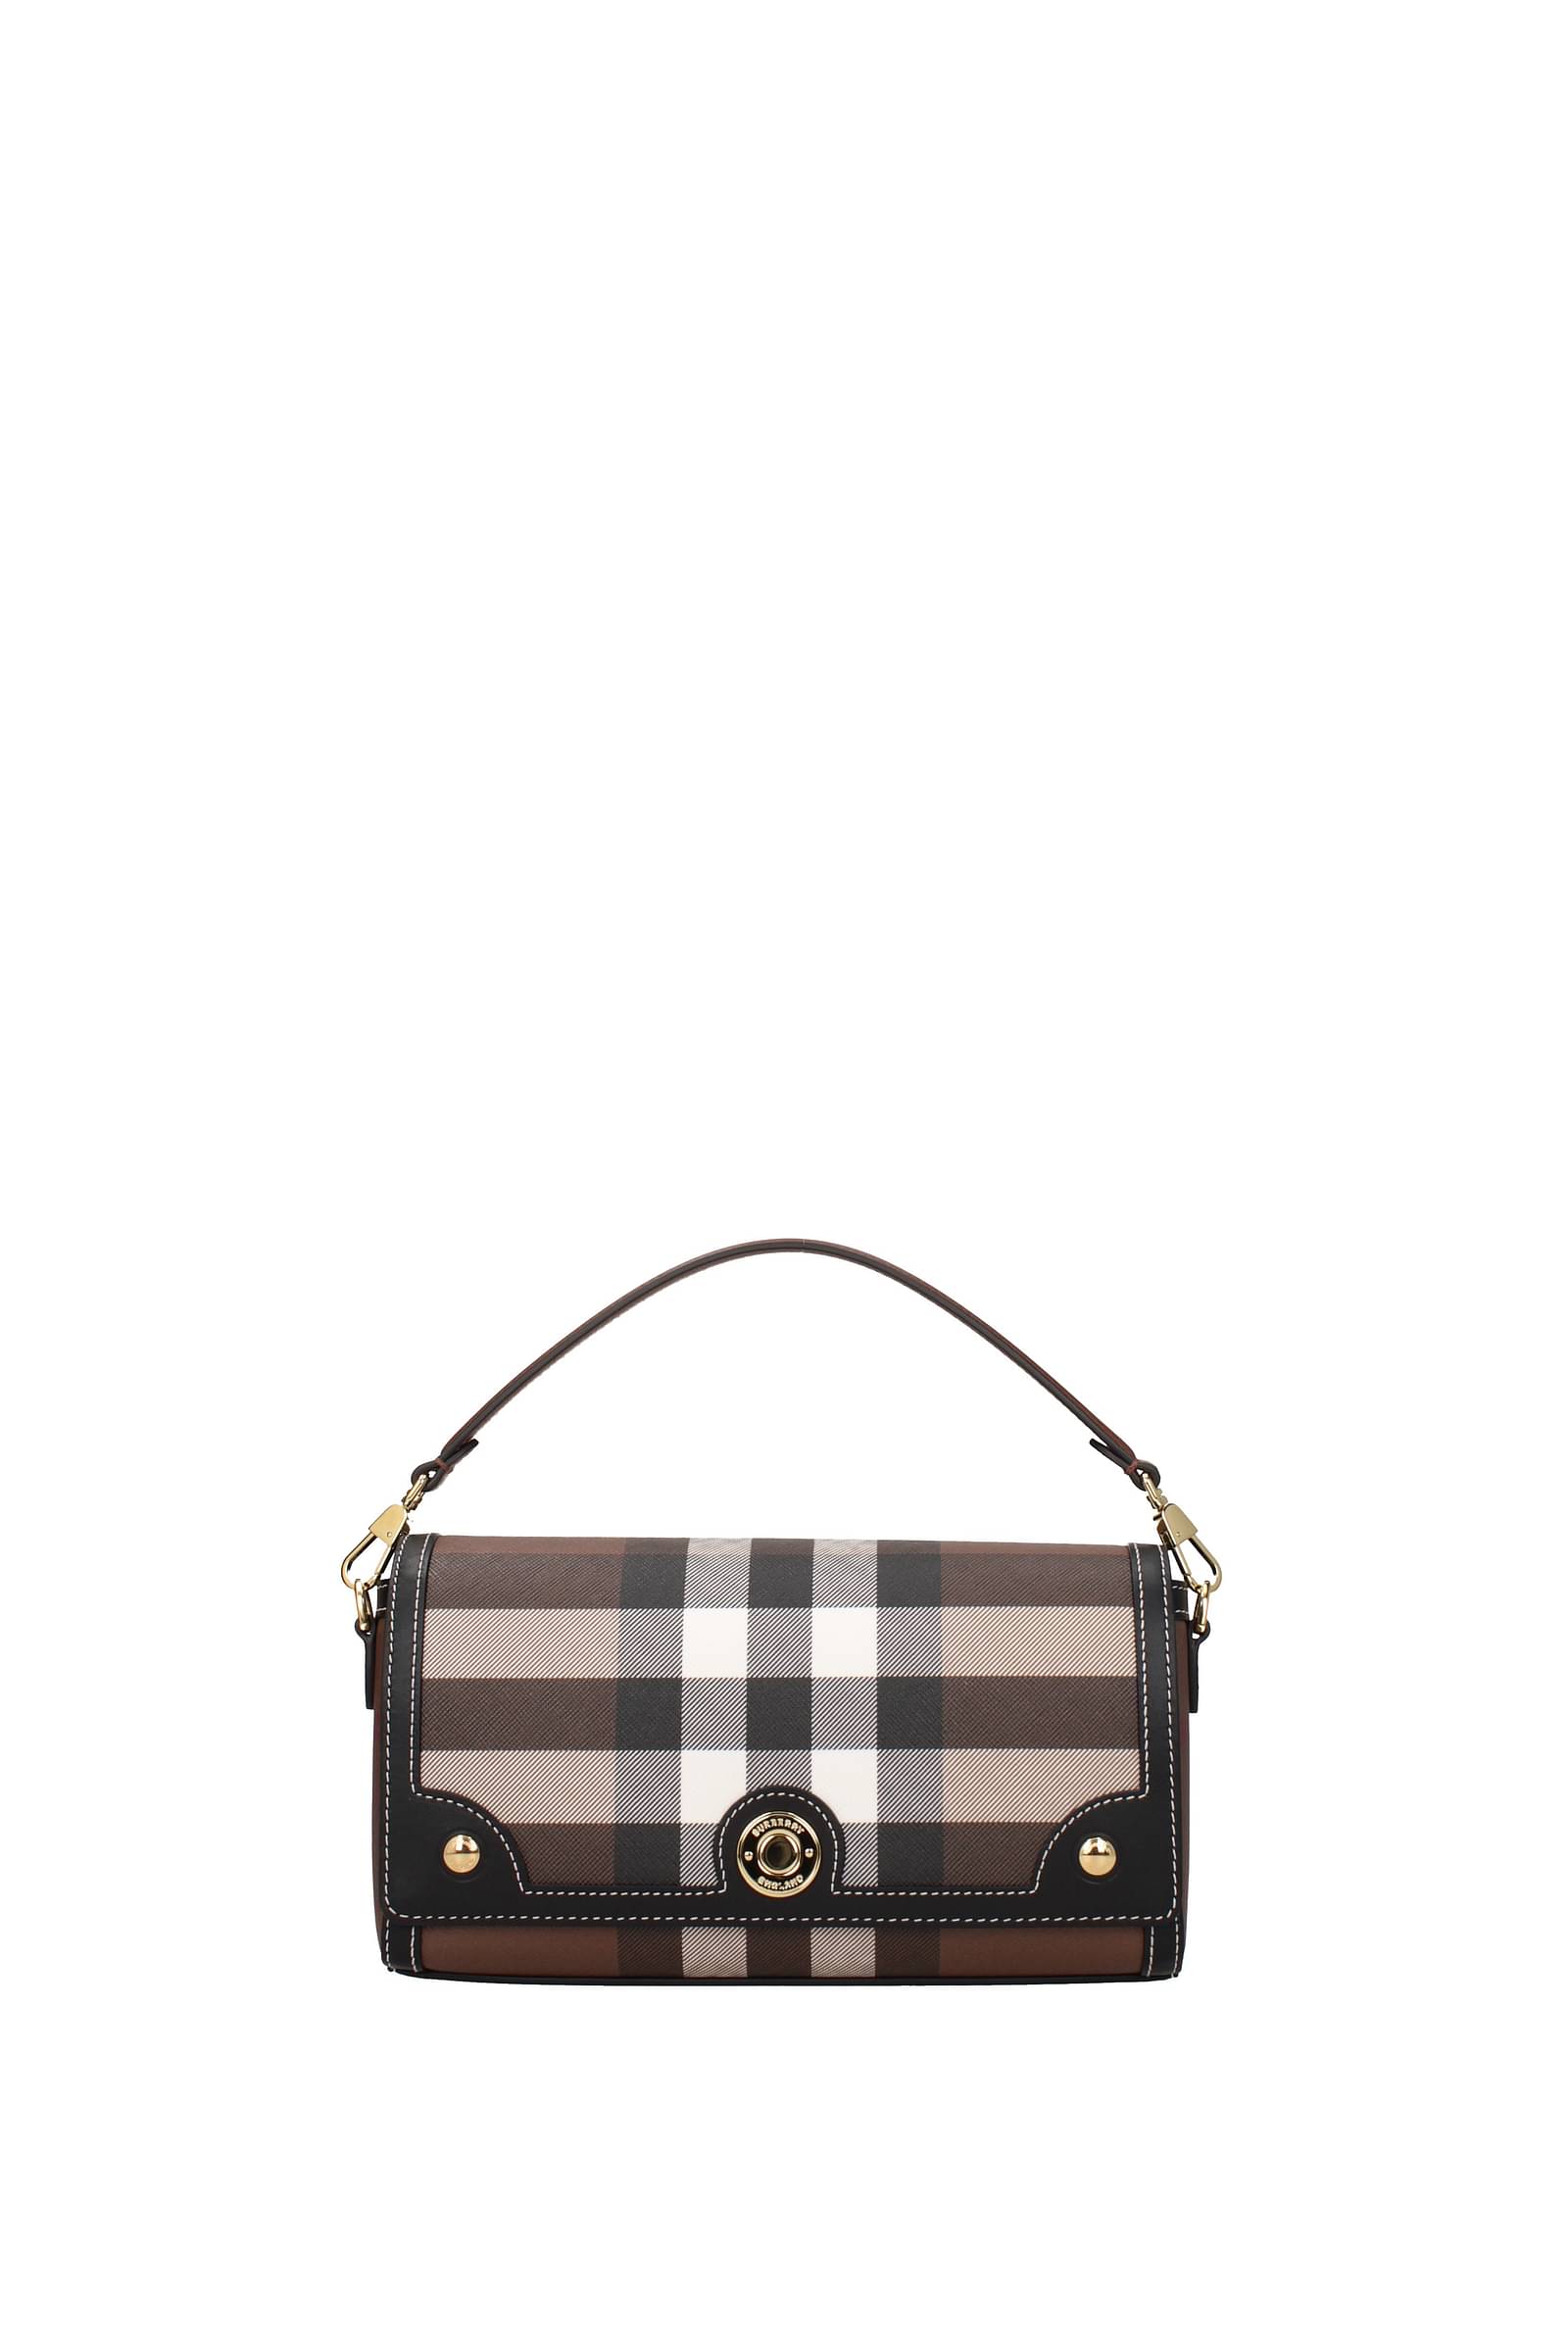 Original Burberry bags at discounted prices